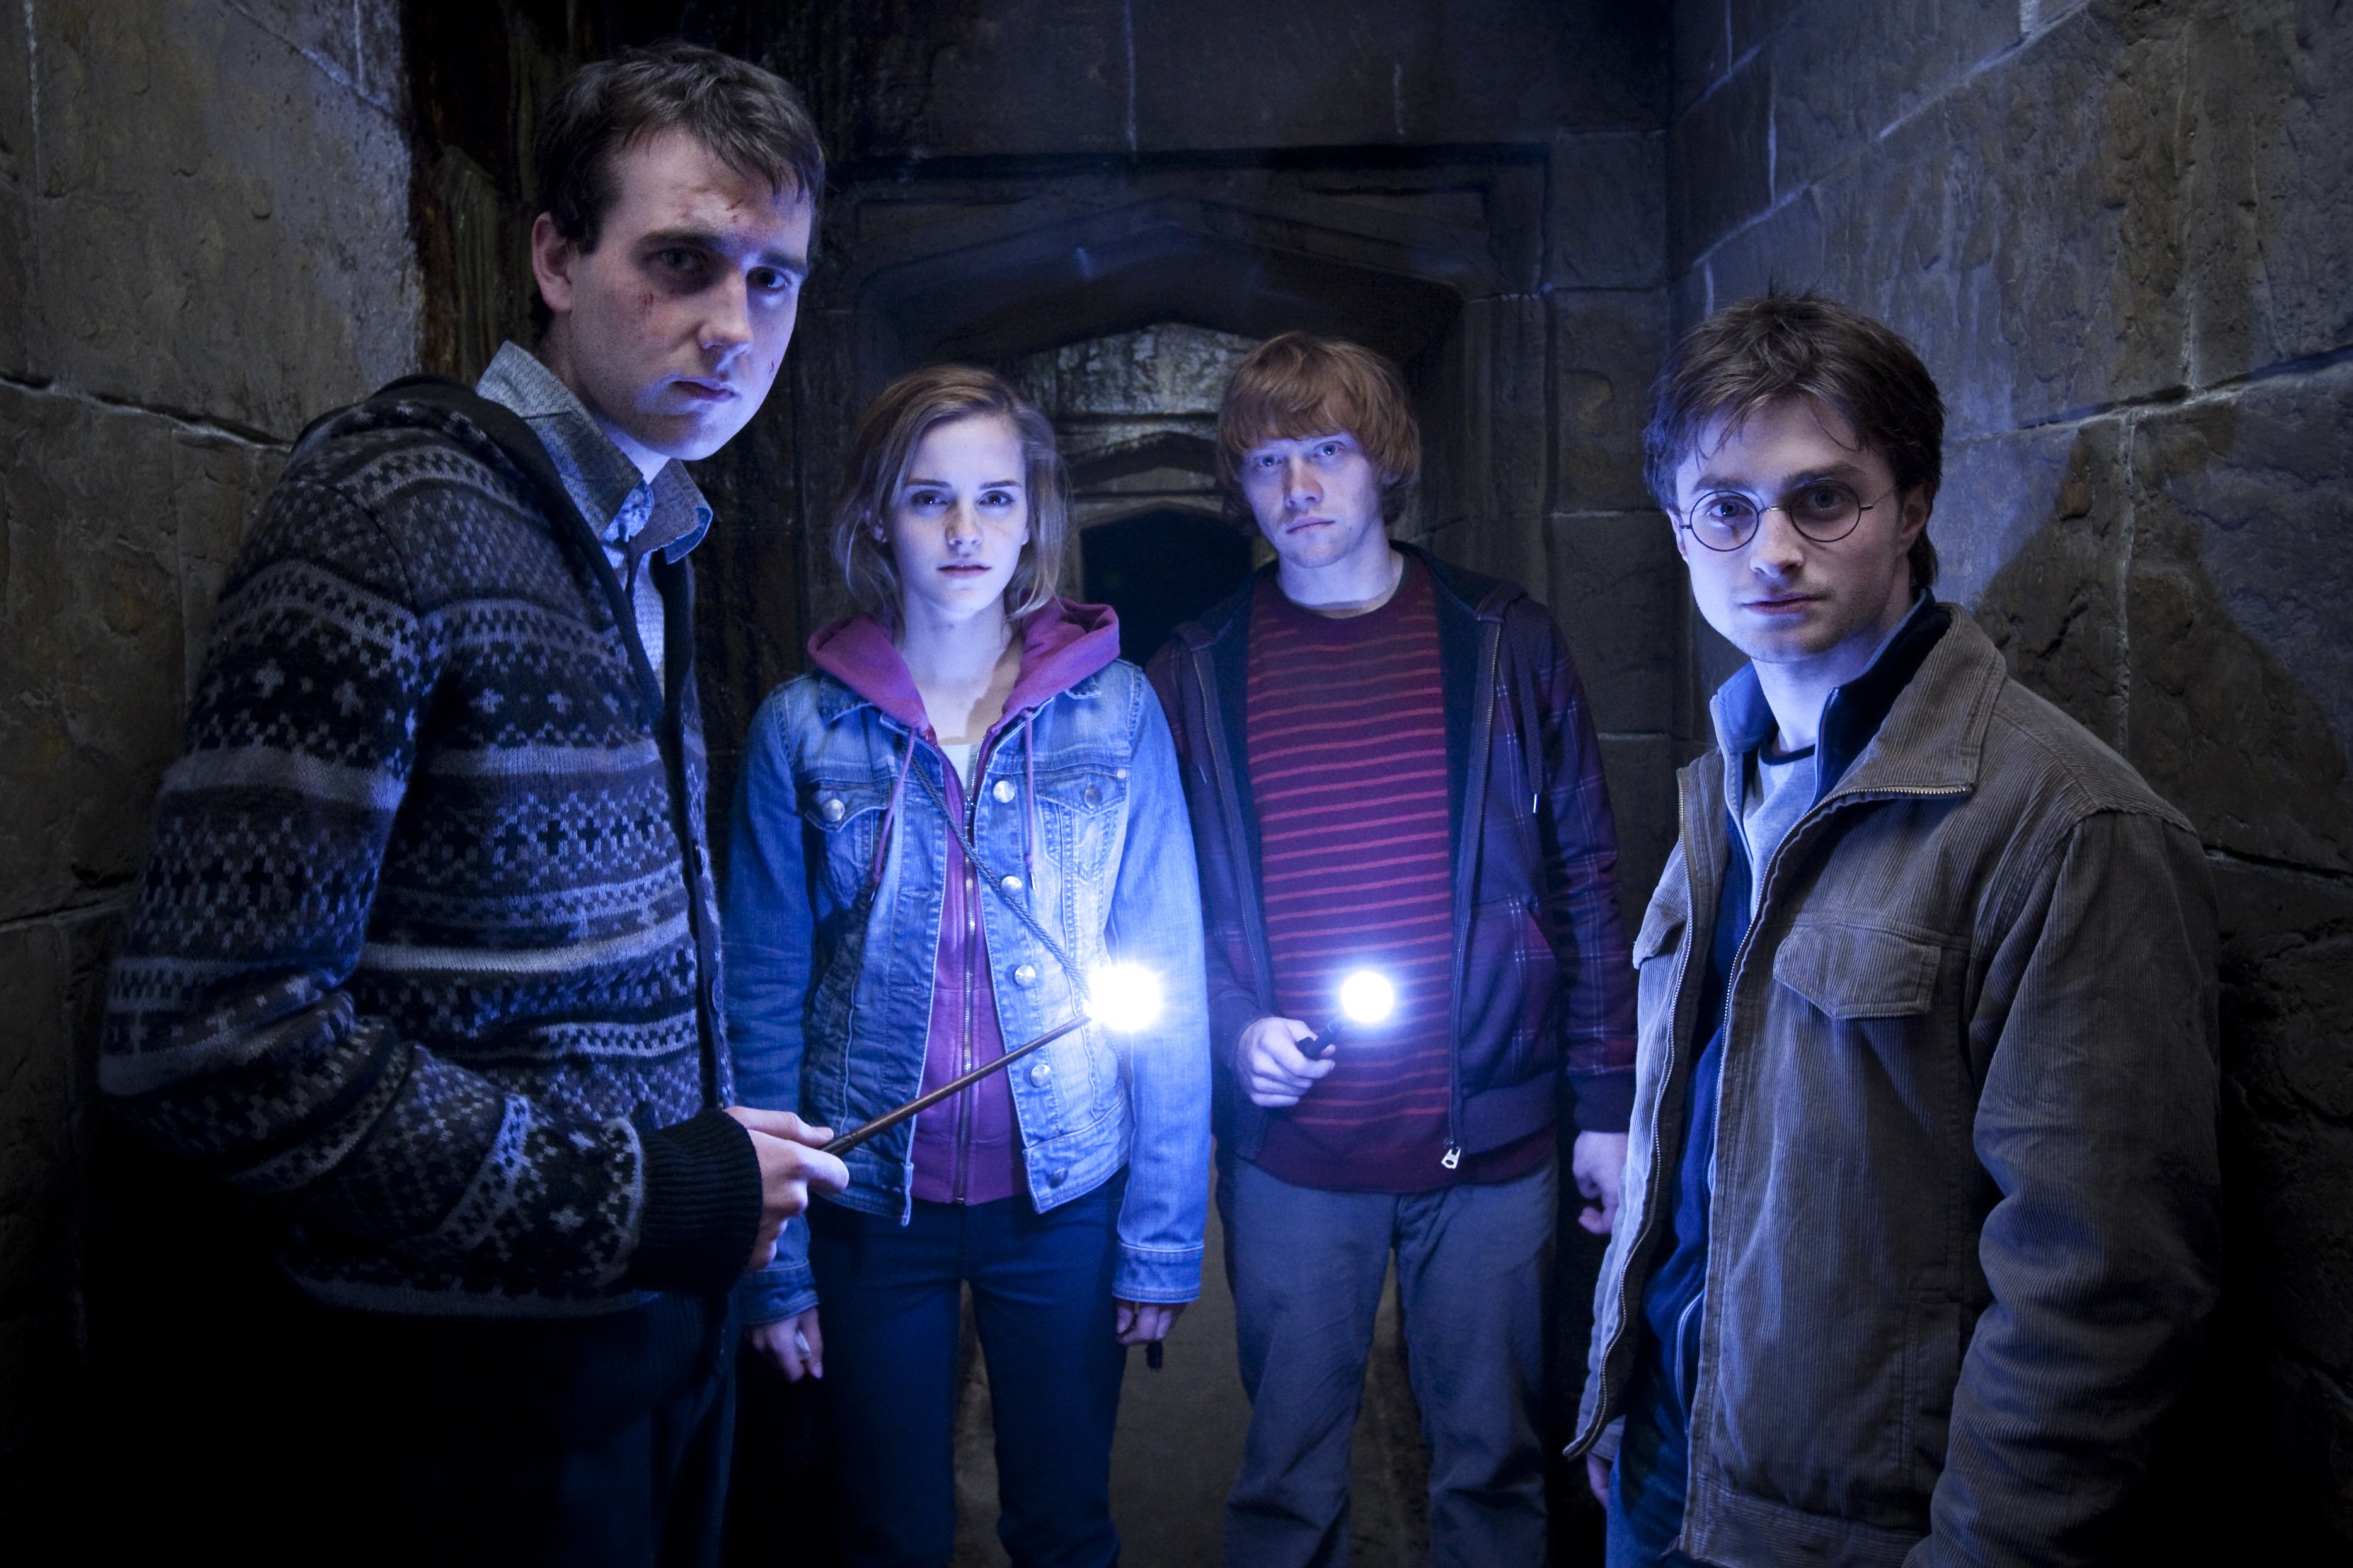 harry potter, movie, harry potter and the deathly hallows: part 2, hermione granger, neville longbottom, ron weasley HD for desktop 1080p